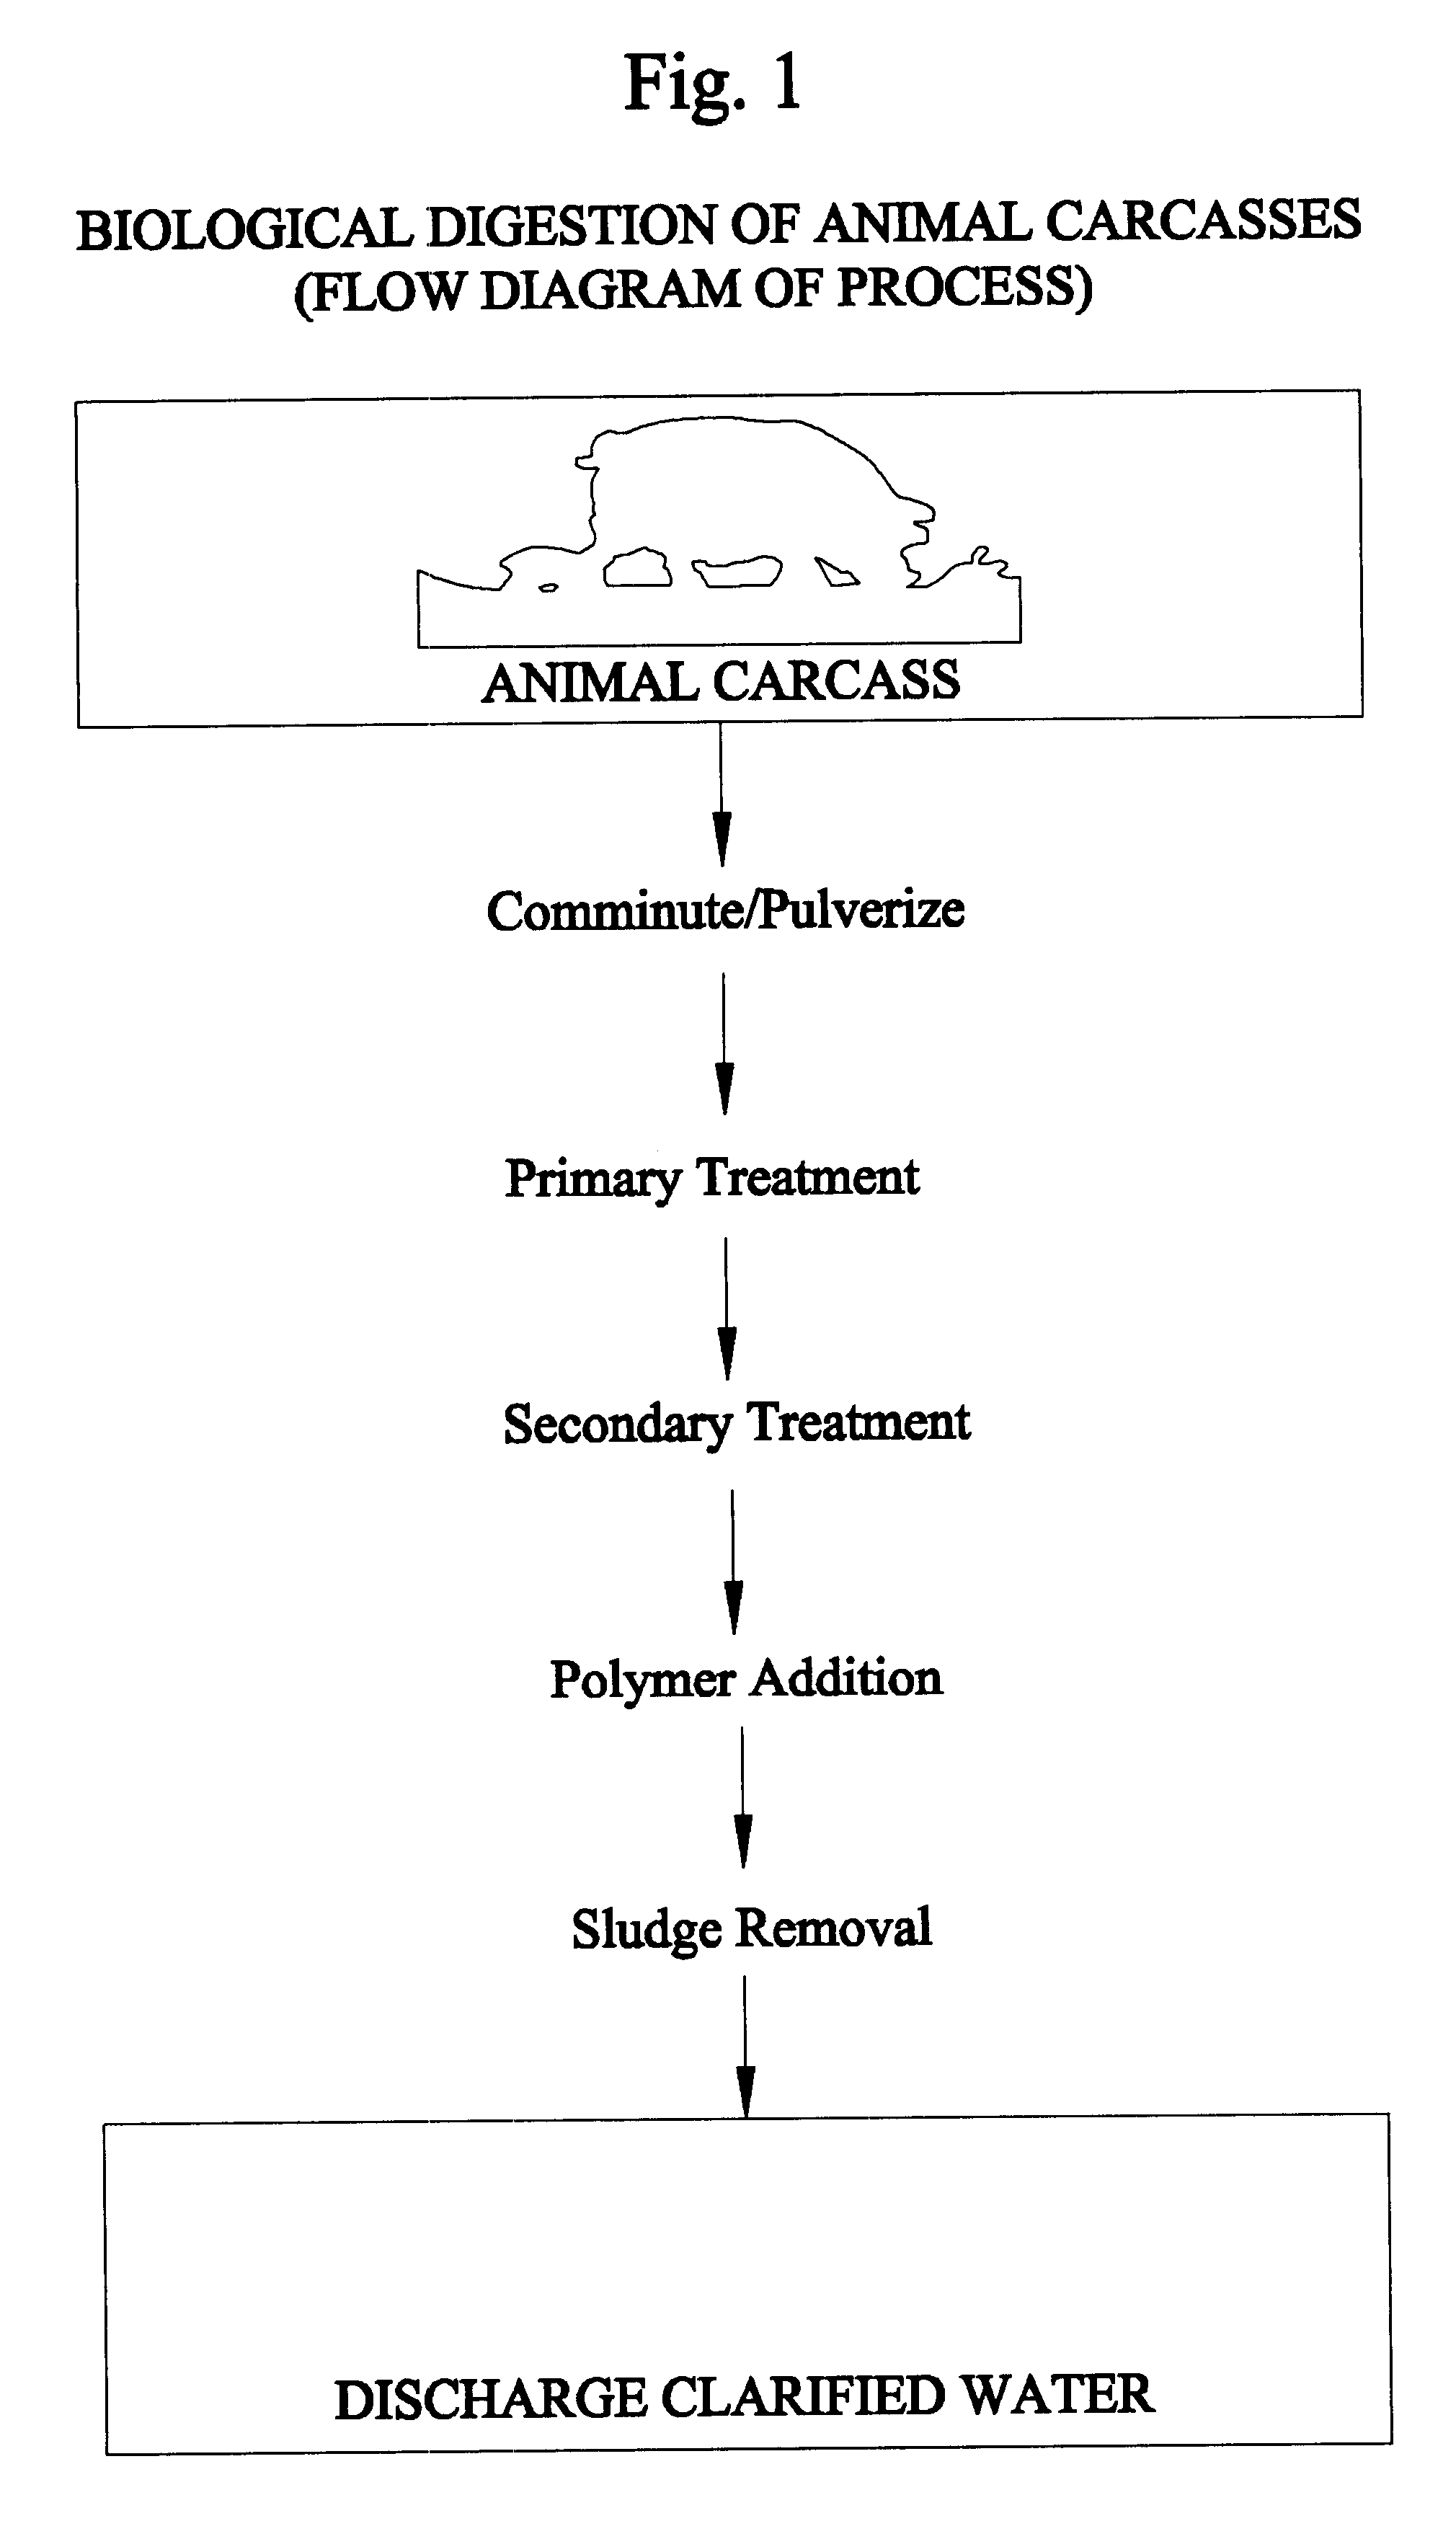 Biological digestion of animal carcasses